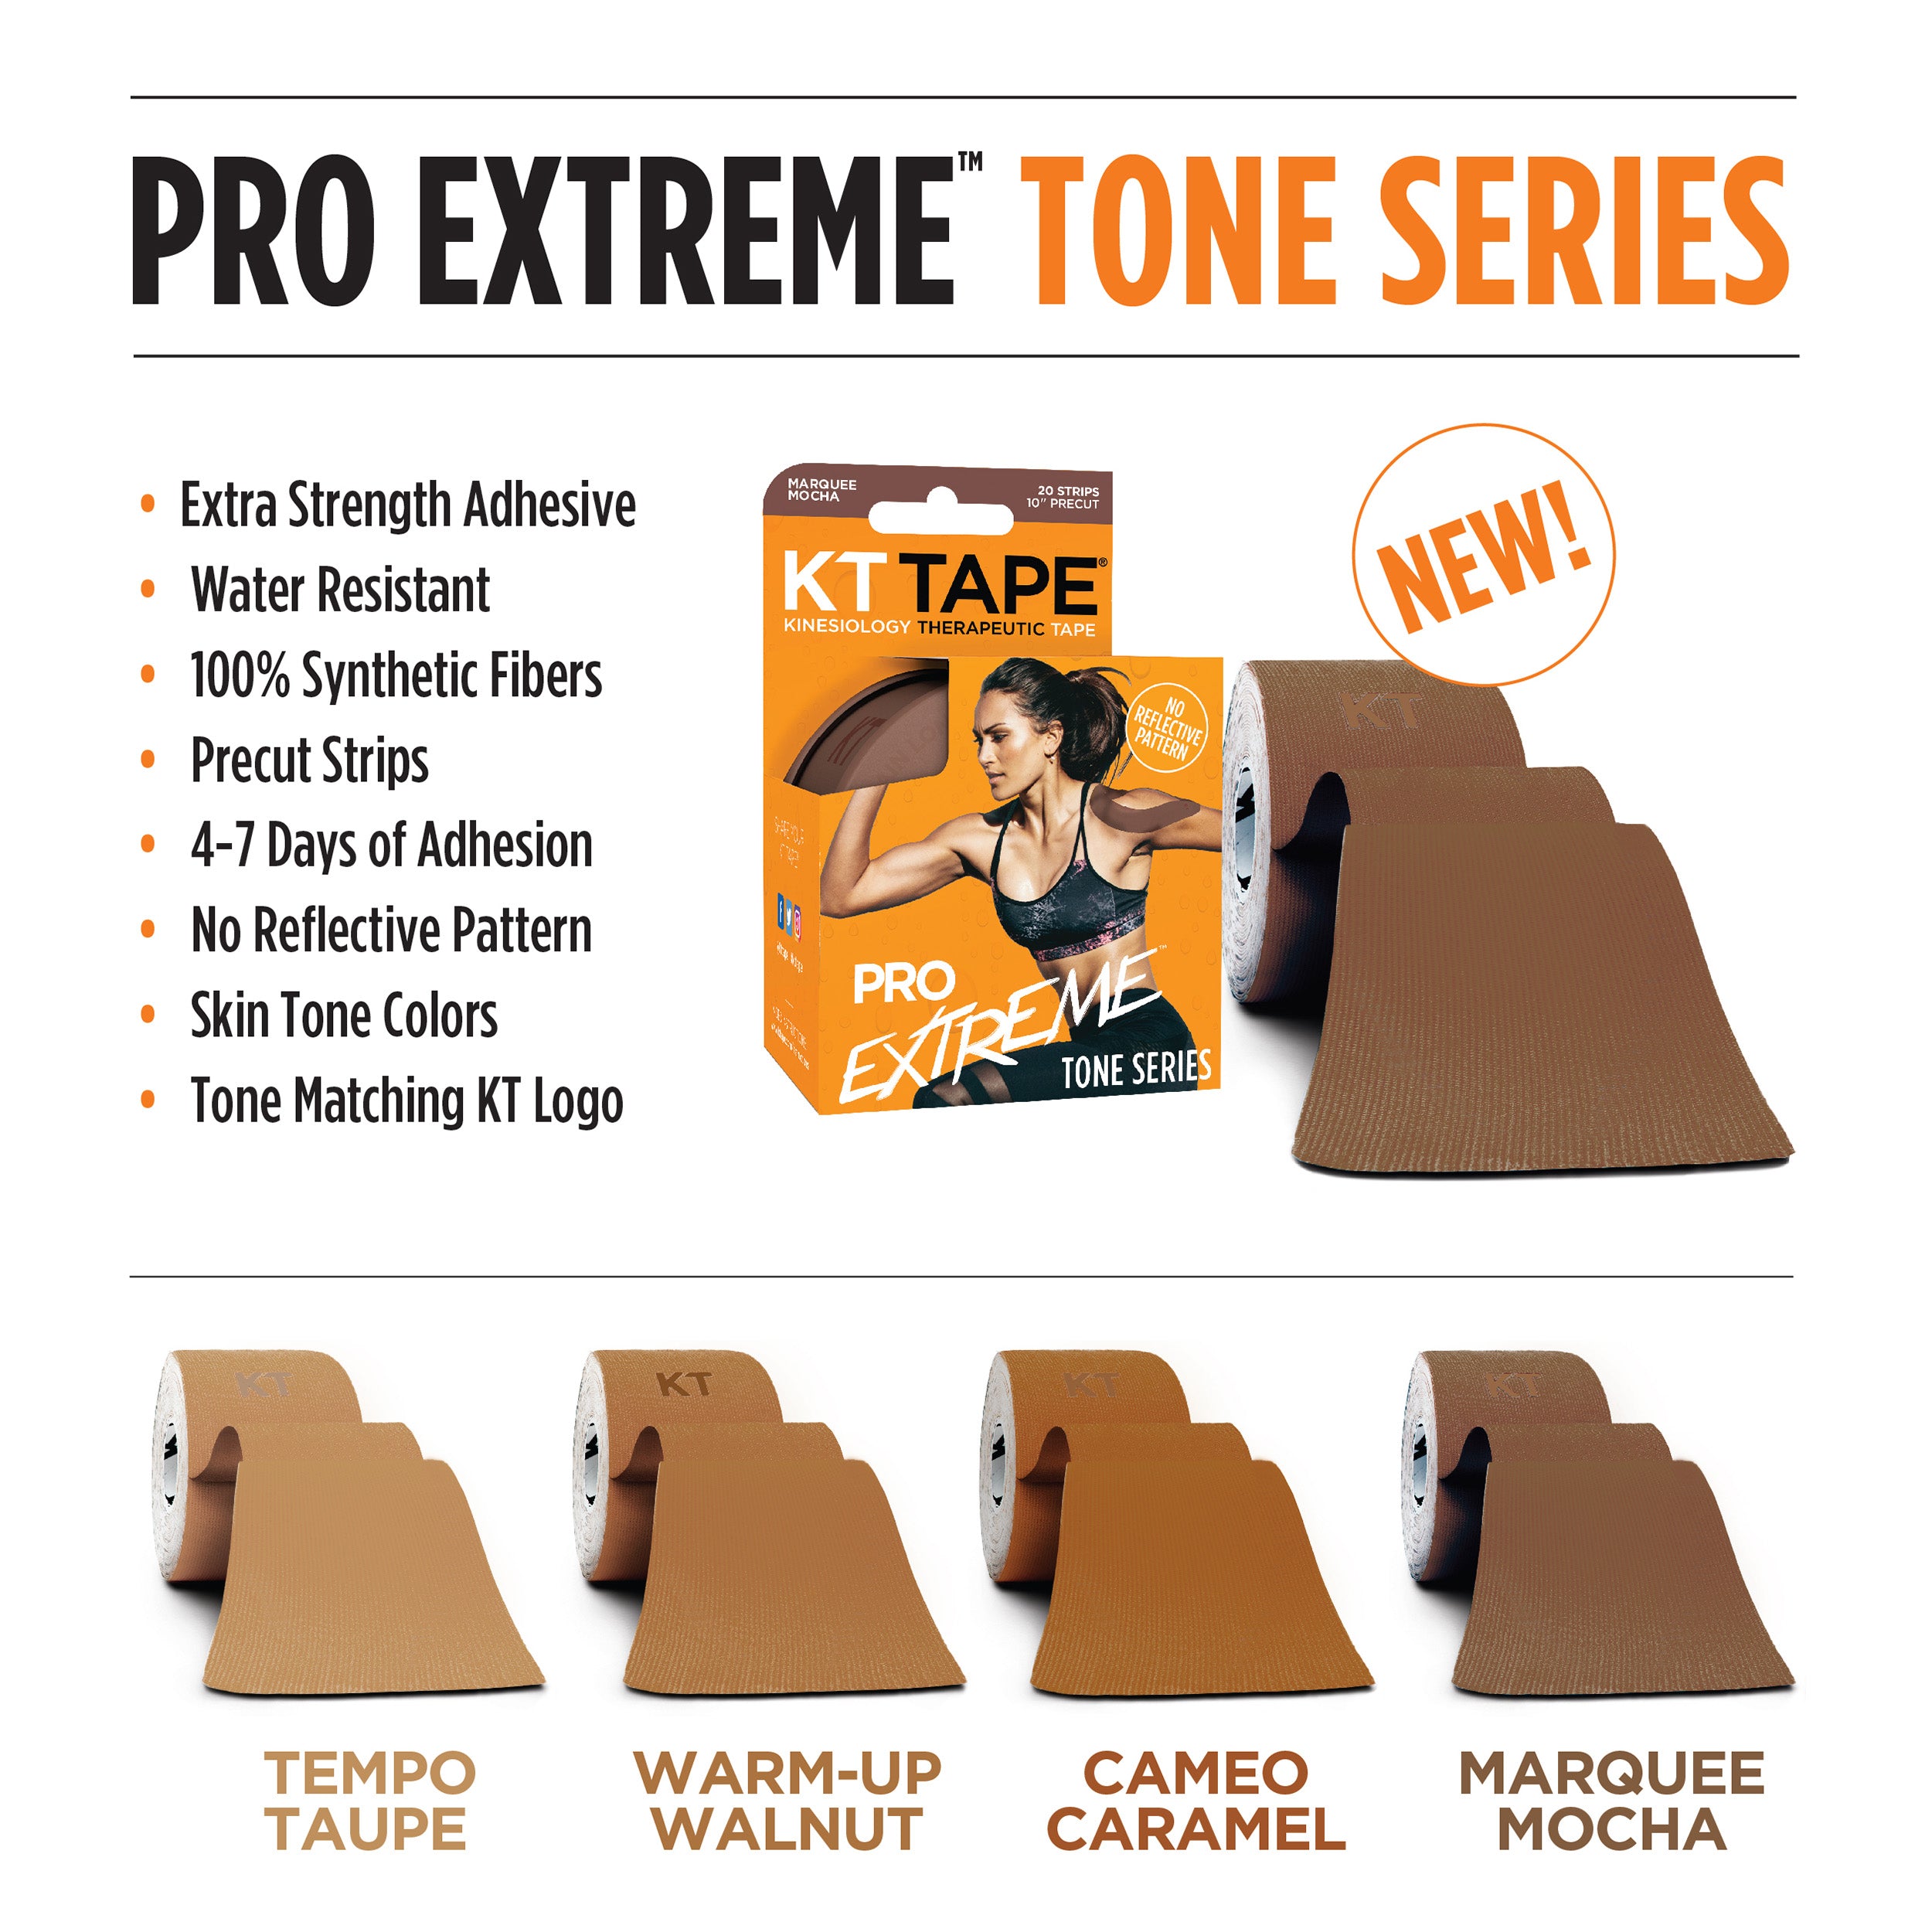 KT Tape Pro Extreme® Tones - for Pain Relief and Support